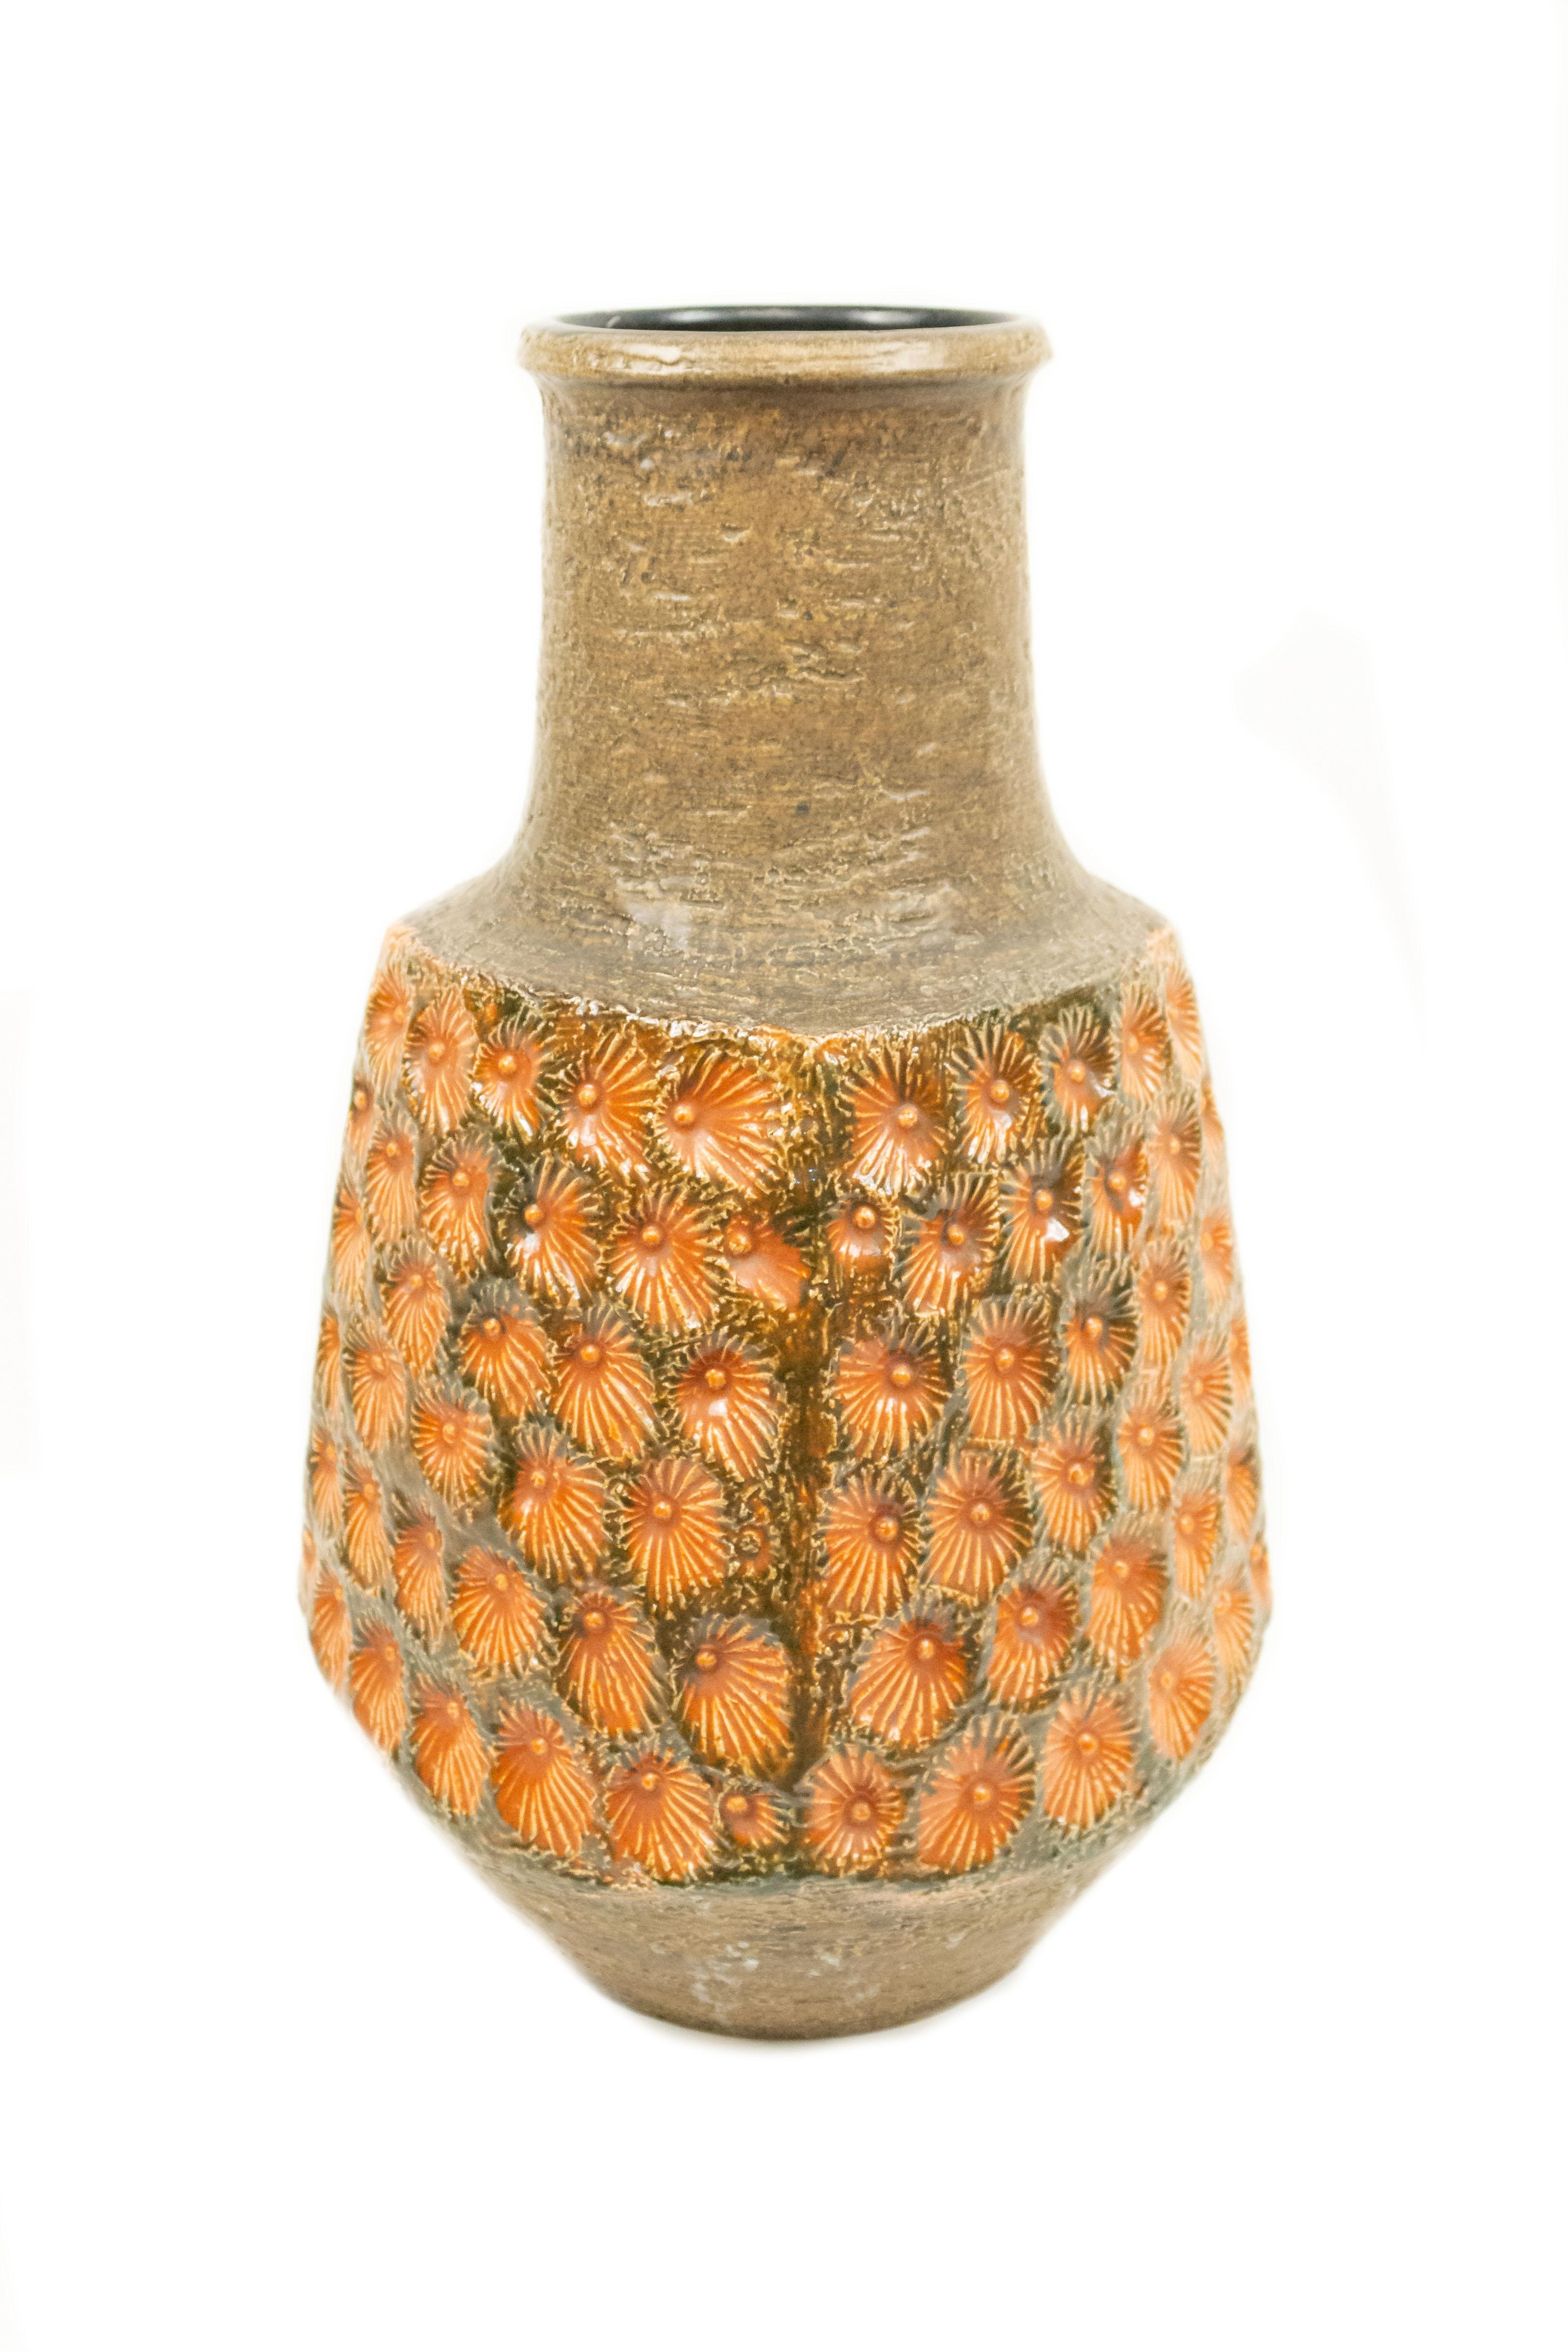 Post-War West Germany olive green ceramic vase with an orange incised centered multiple shell form pattern (JASBA).
      